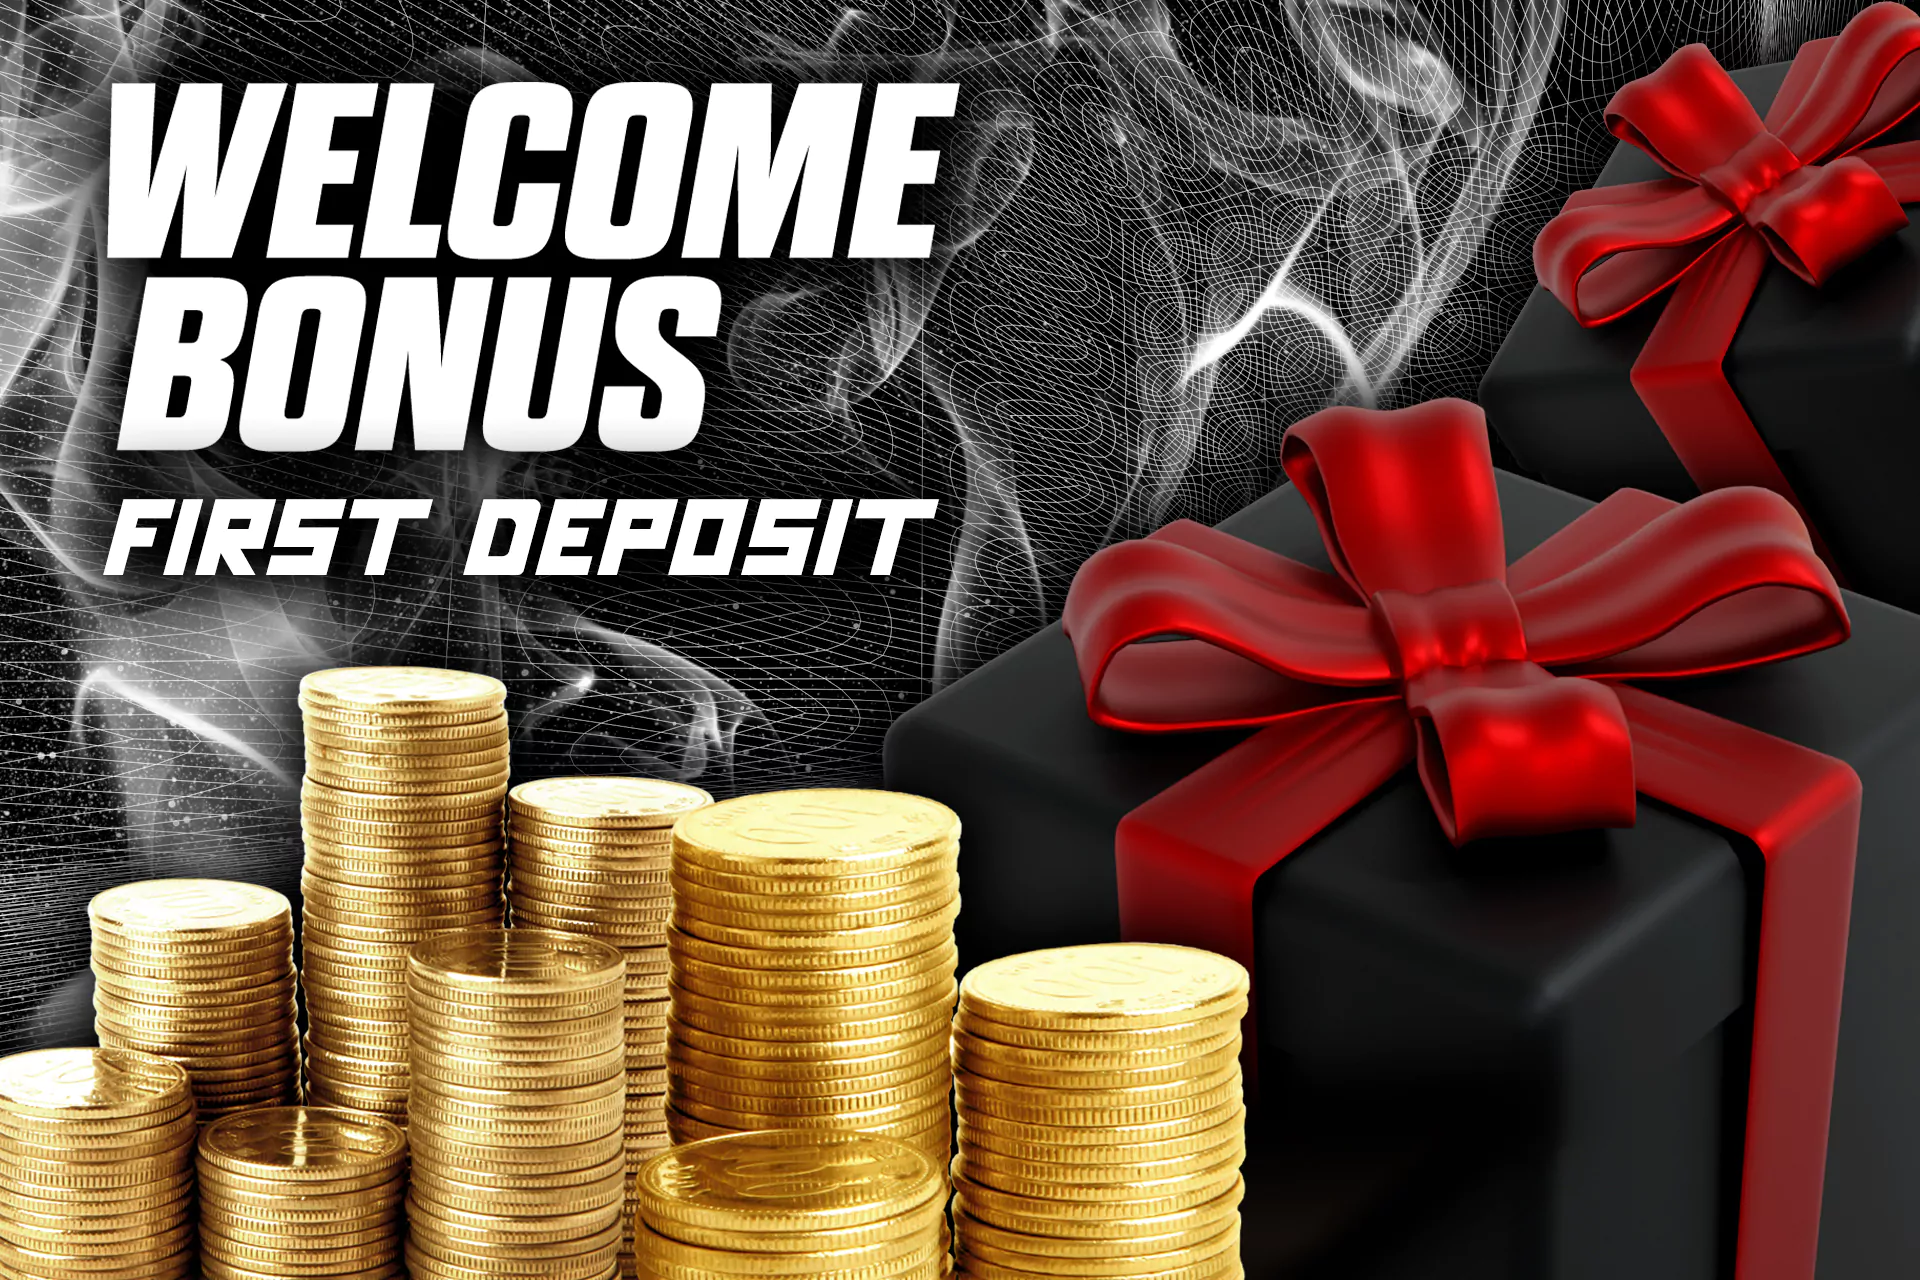 Welcome bonuses on the first deposits.